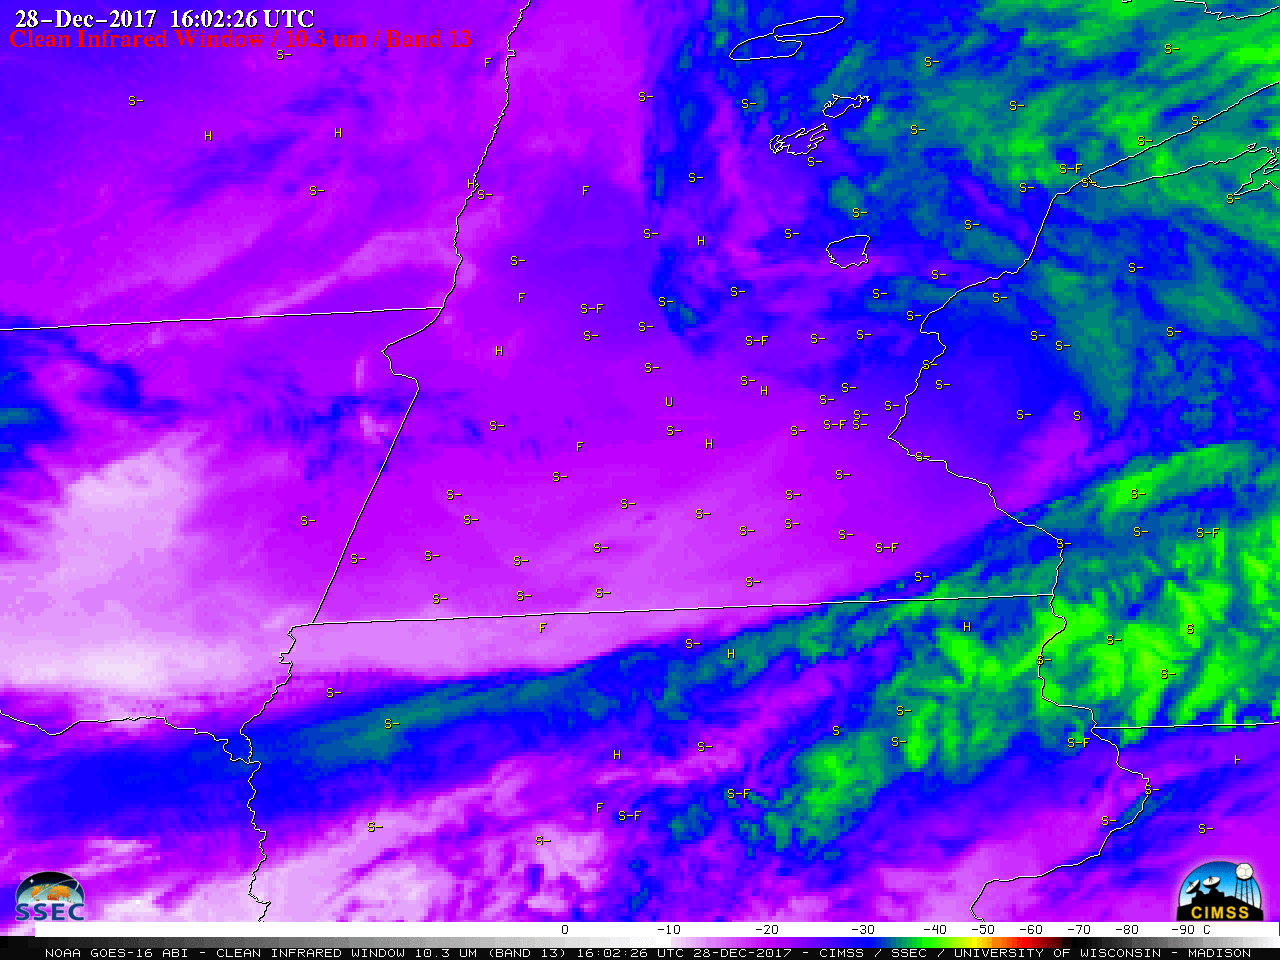 GOES-16 "Clean" Infrared Window (10.3 µm) images, with hourly surface-observed precipitation type plotted in yellow [click to play MP4 animation]